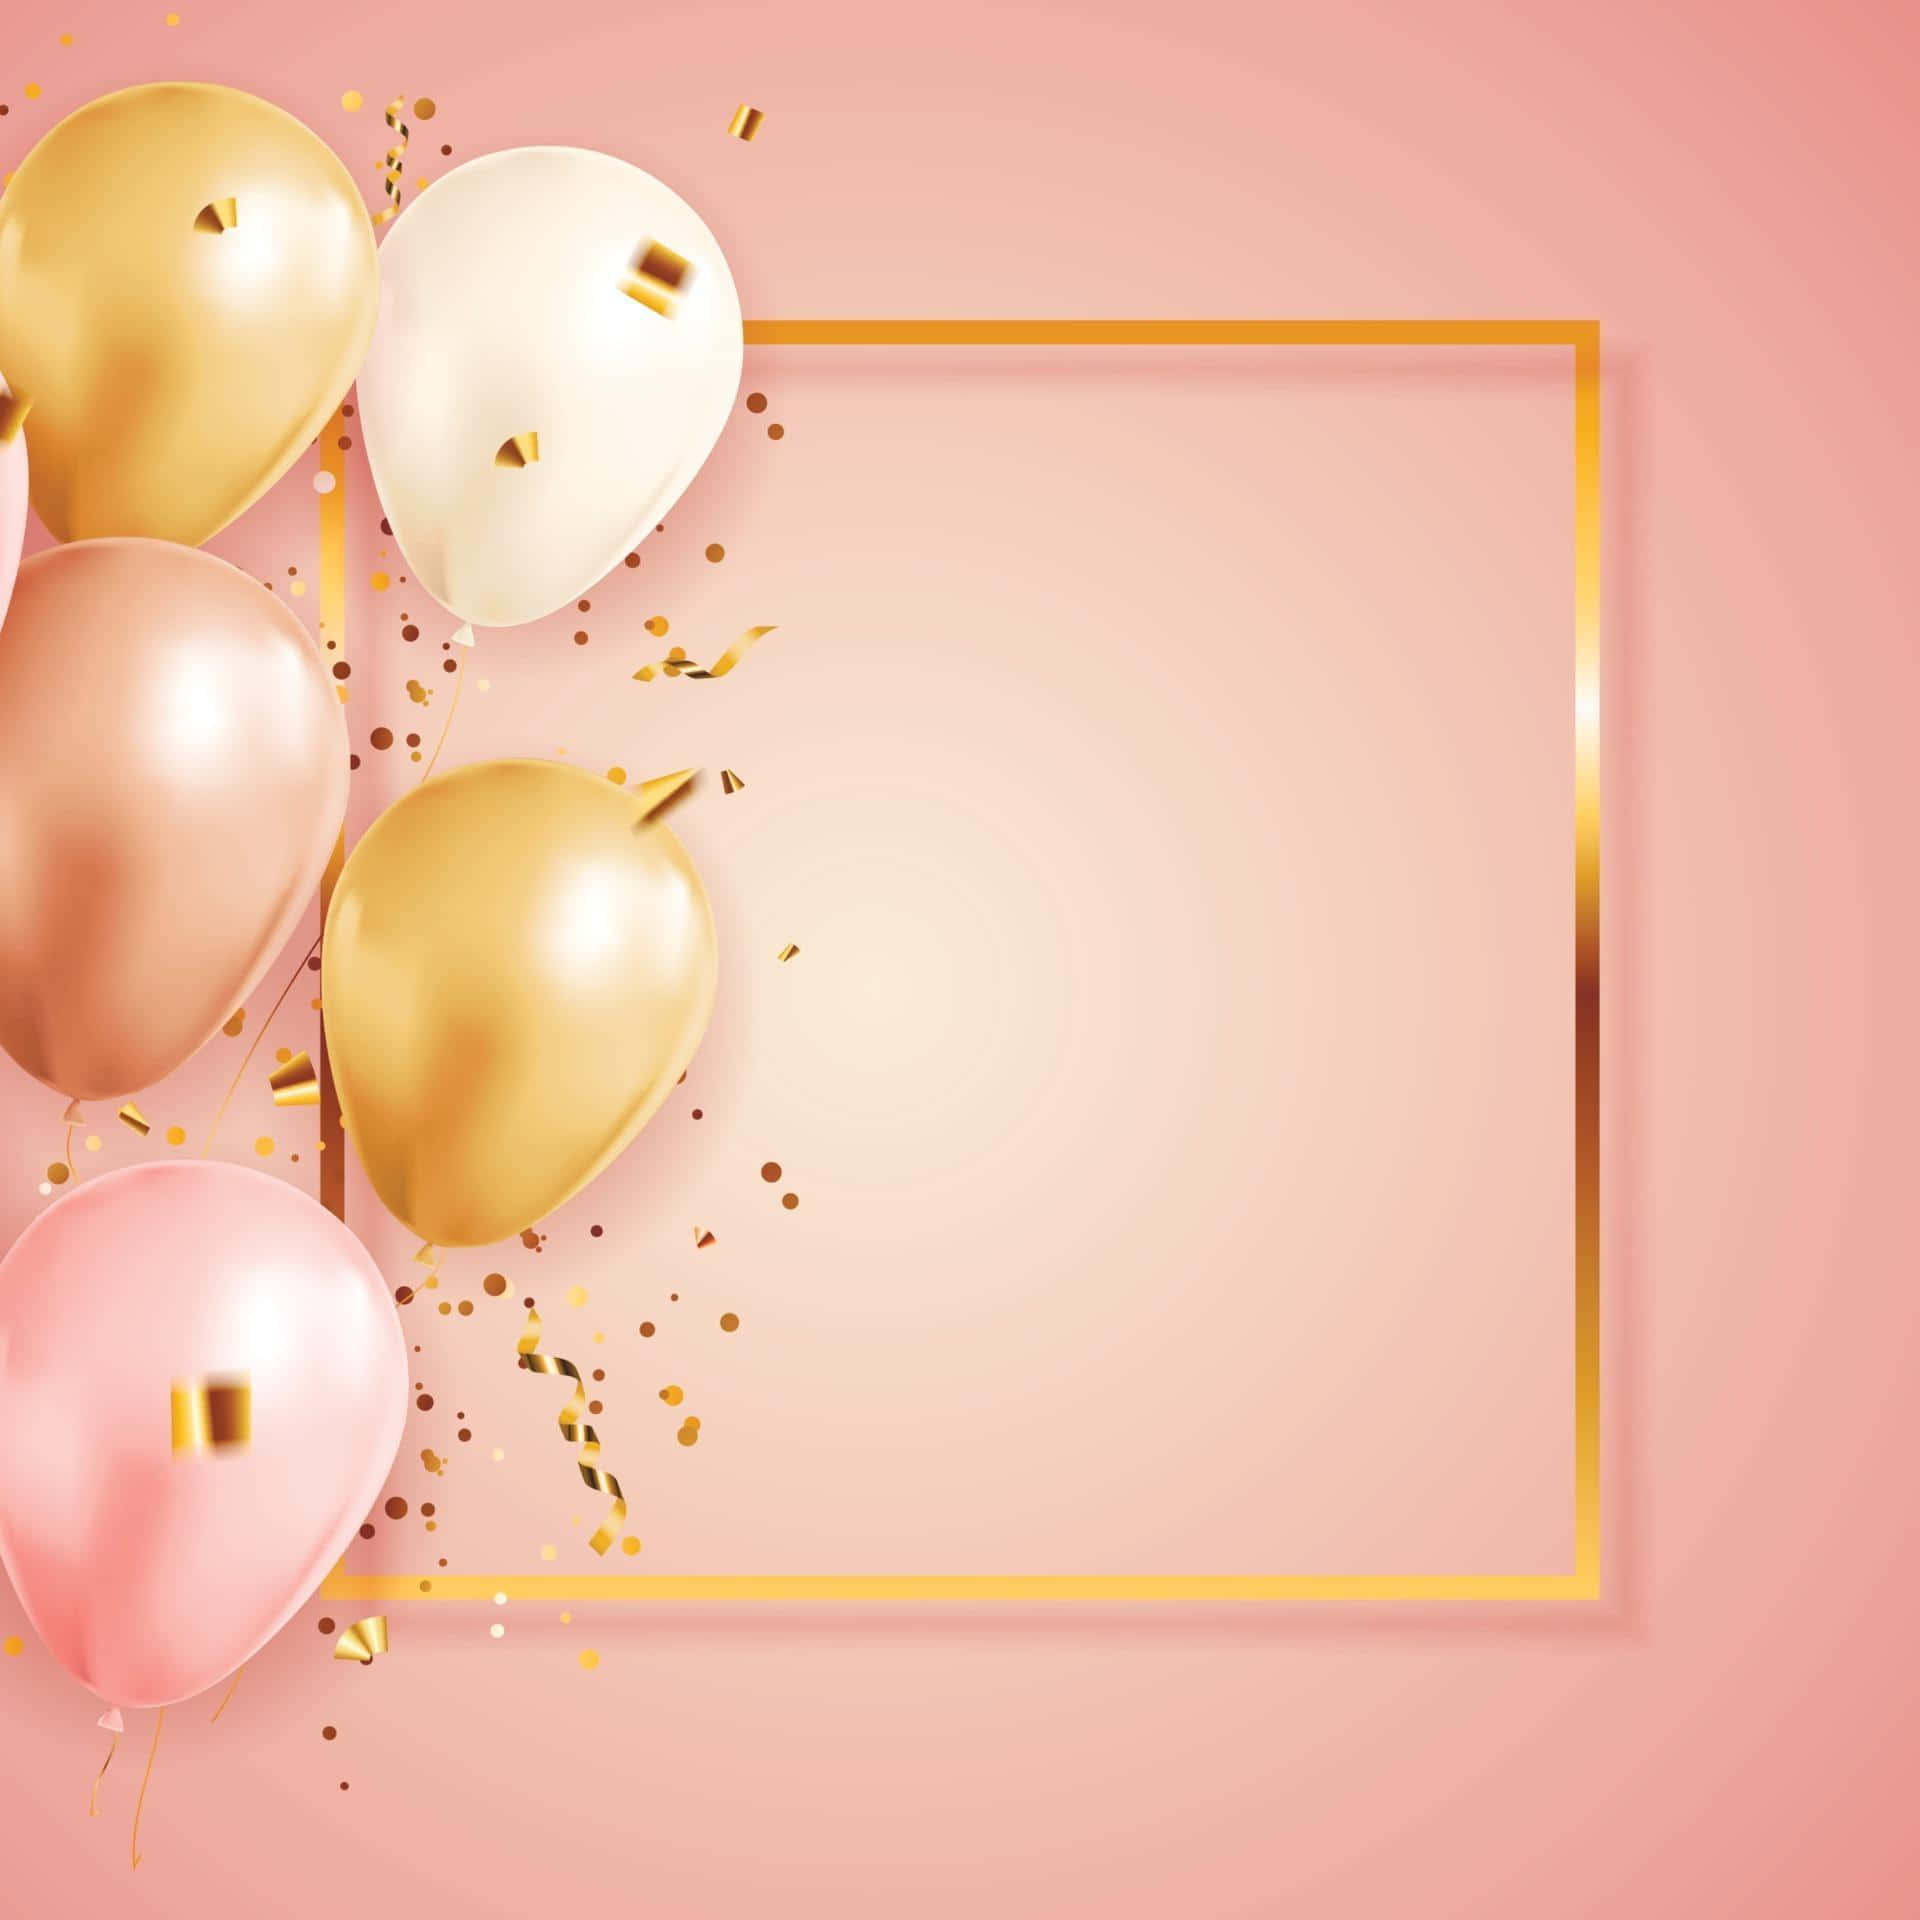 Fiesta Gold And Pink Theme Background